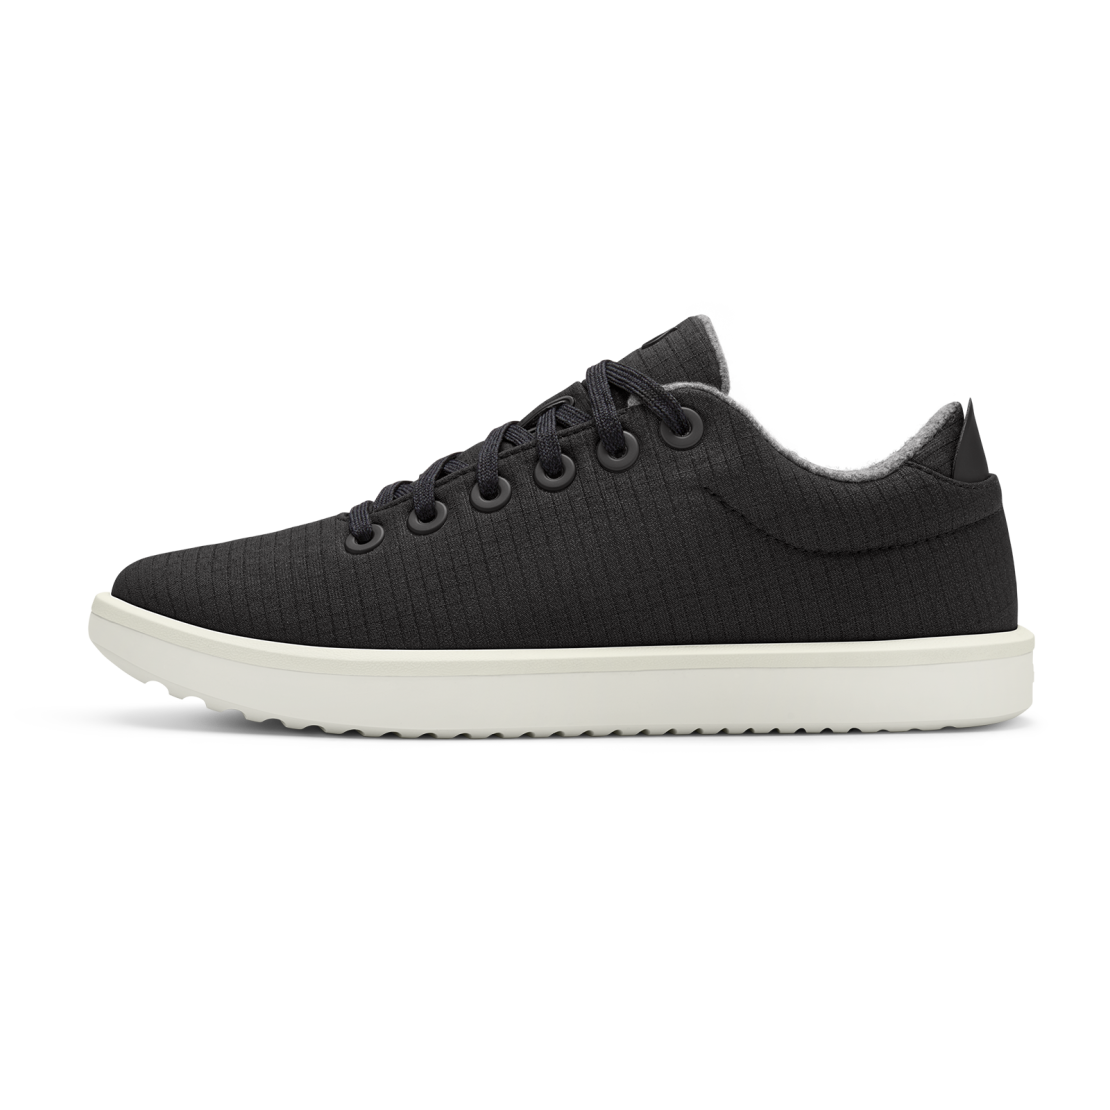 Men's Wool Piper Woven - Natural Black (Natural White Sole)